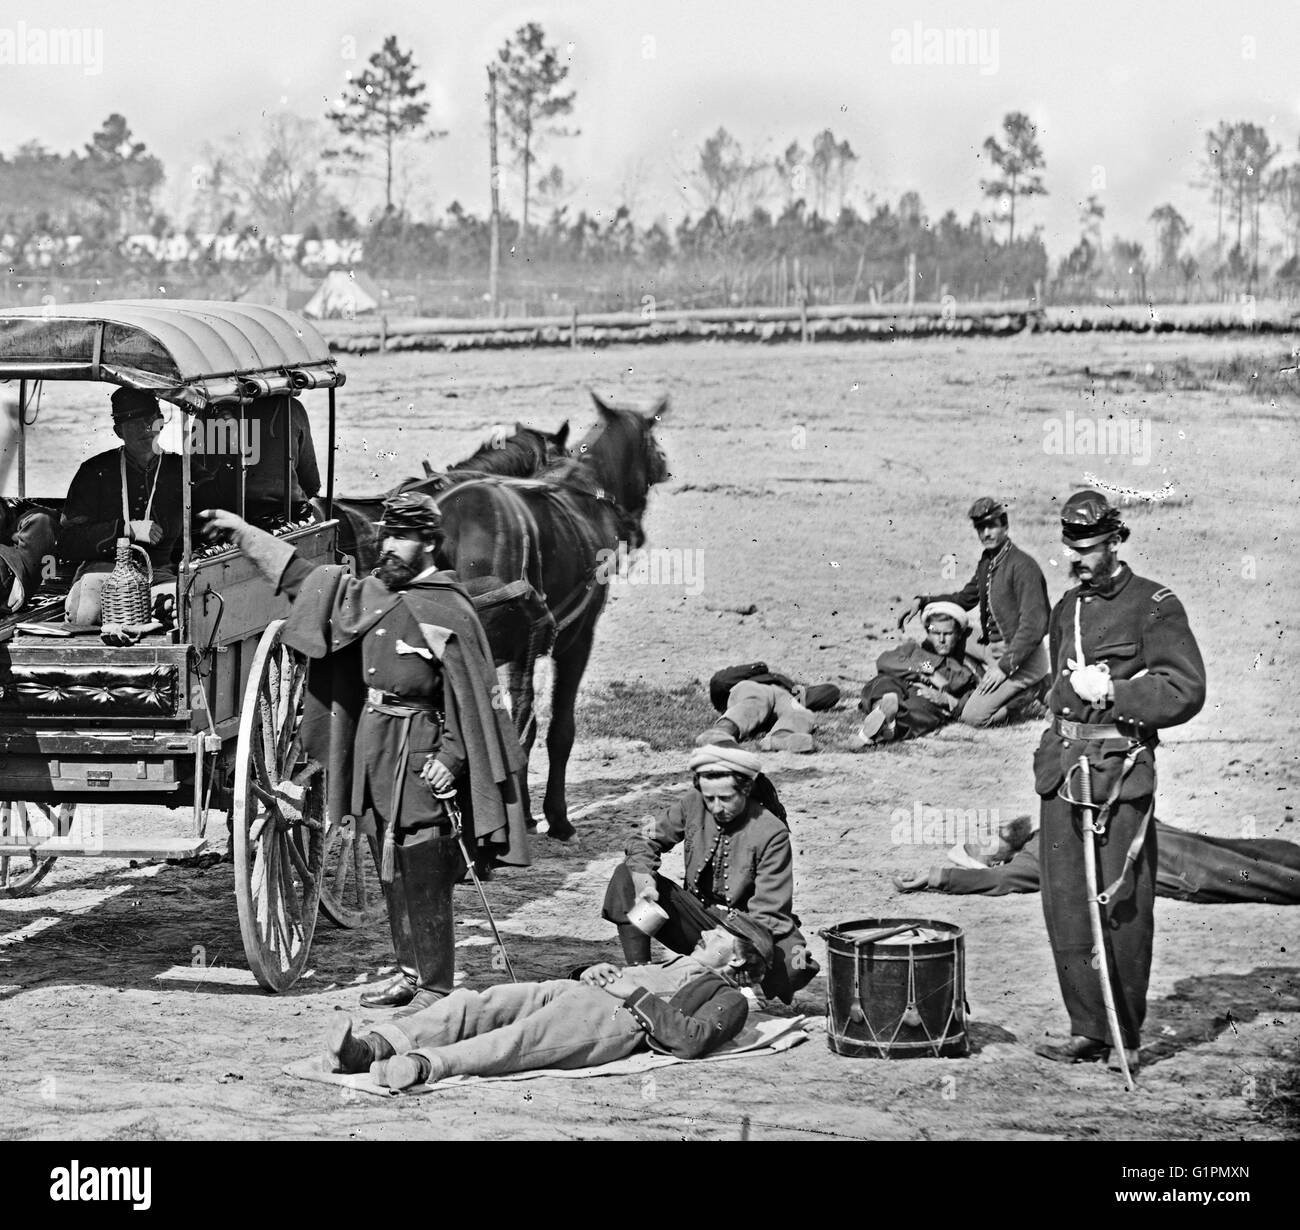 CIVIL WAR: AMBULANCE, 1864. Zouave ambulance crew at the headquarters of the Army of the Potomac near Brandy Station, Virginia. Photograph, May 1864. Stock Photo